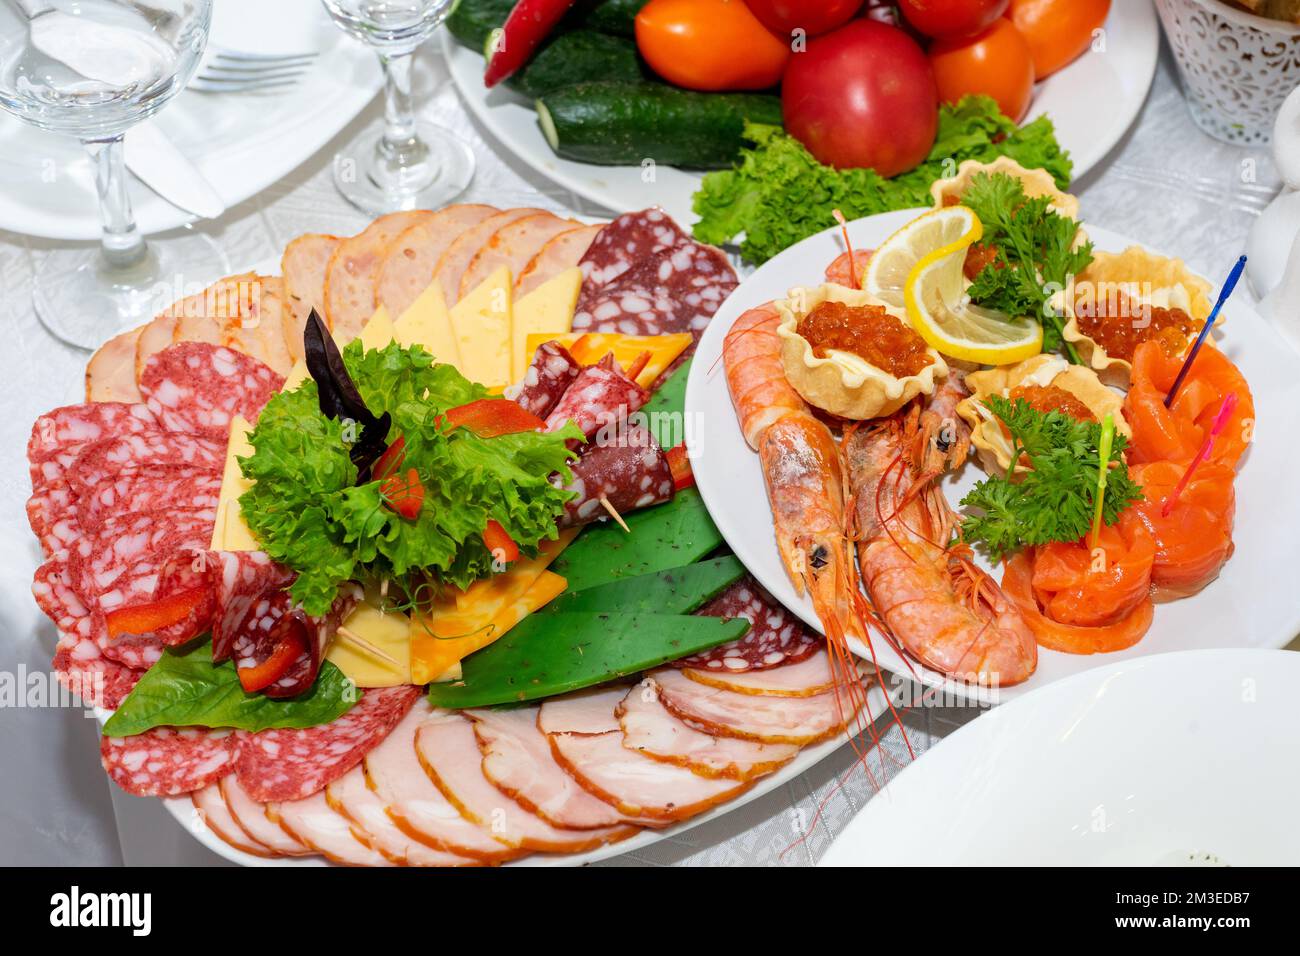 Delicious cold snacks are ready to eat. Cut meat and seafood on the festive table. Stock Photo